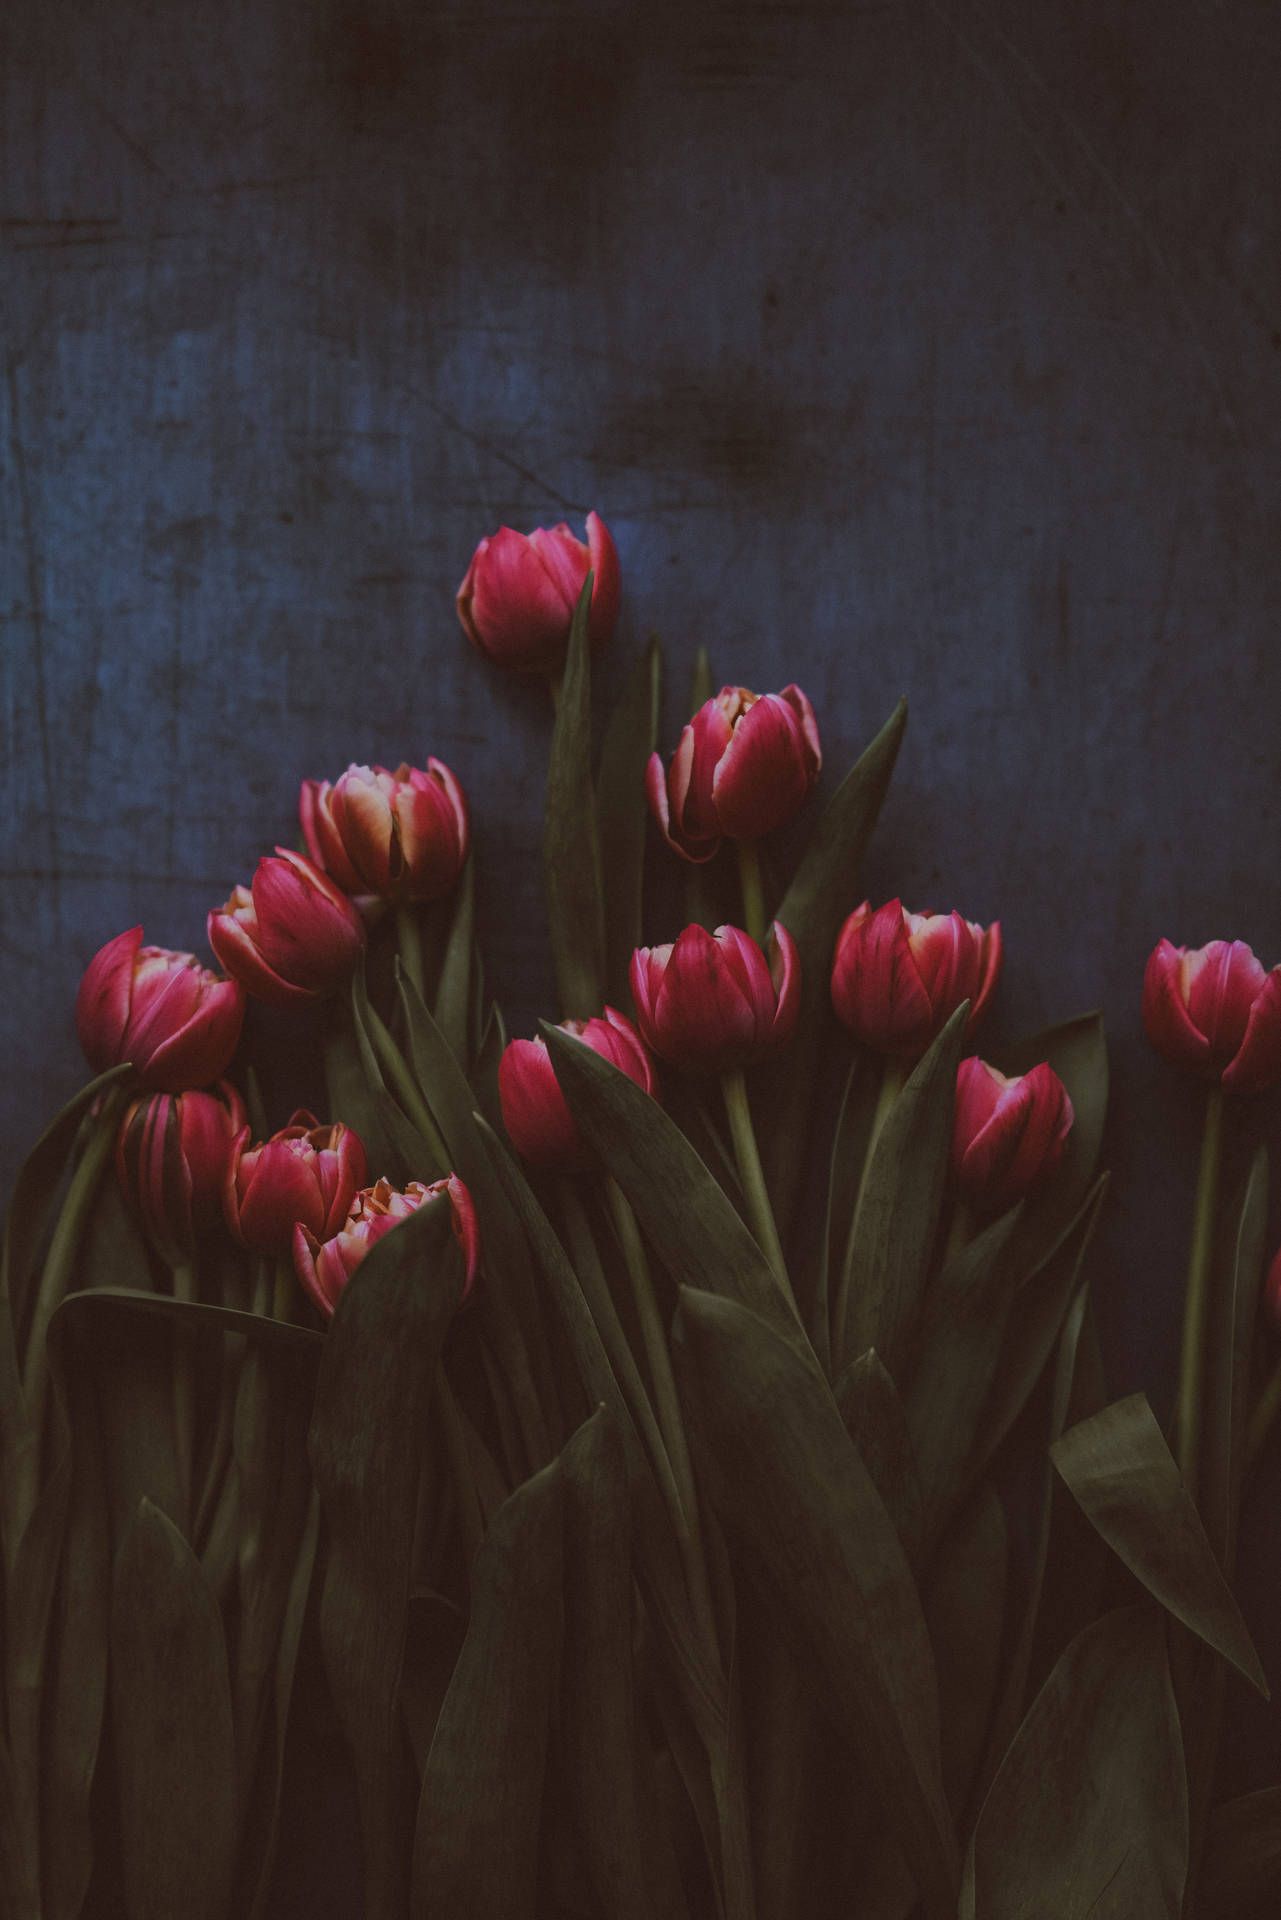 A bouquet of red tulips with green leaves. - Tulip